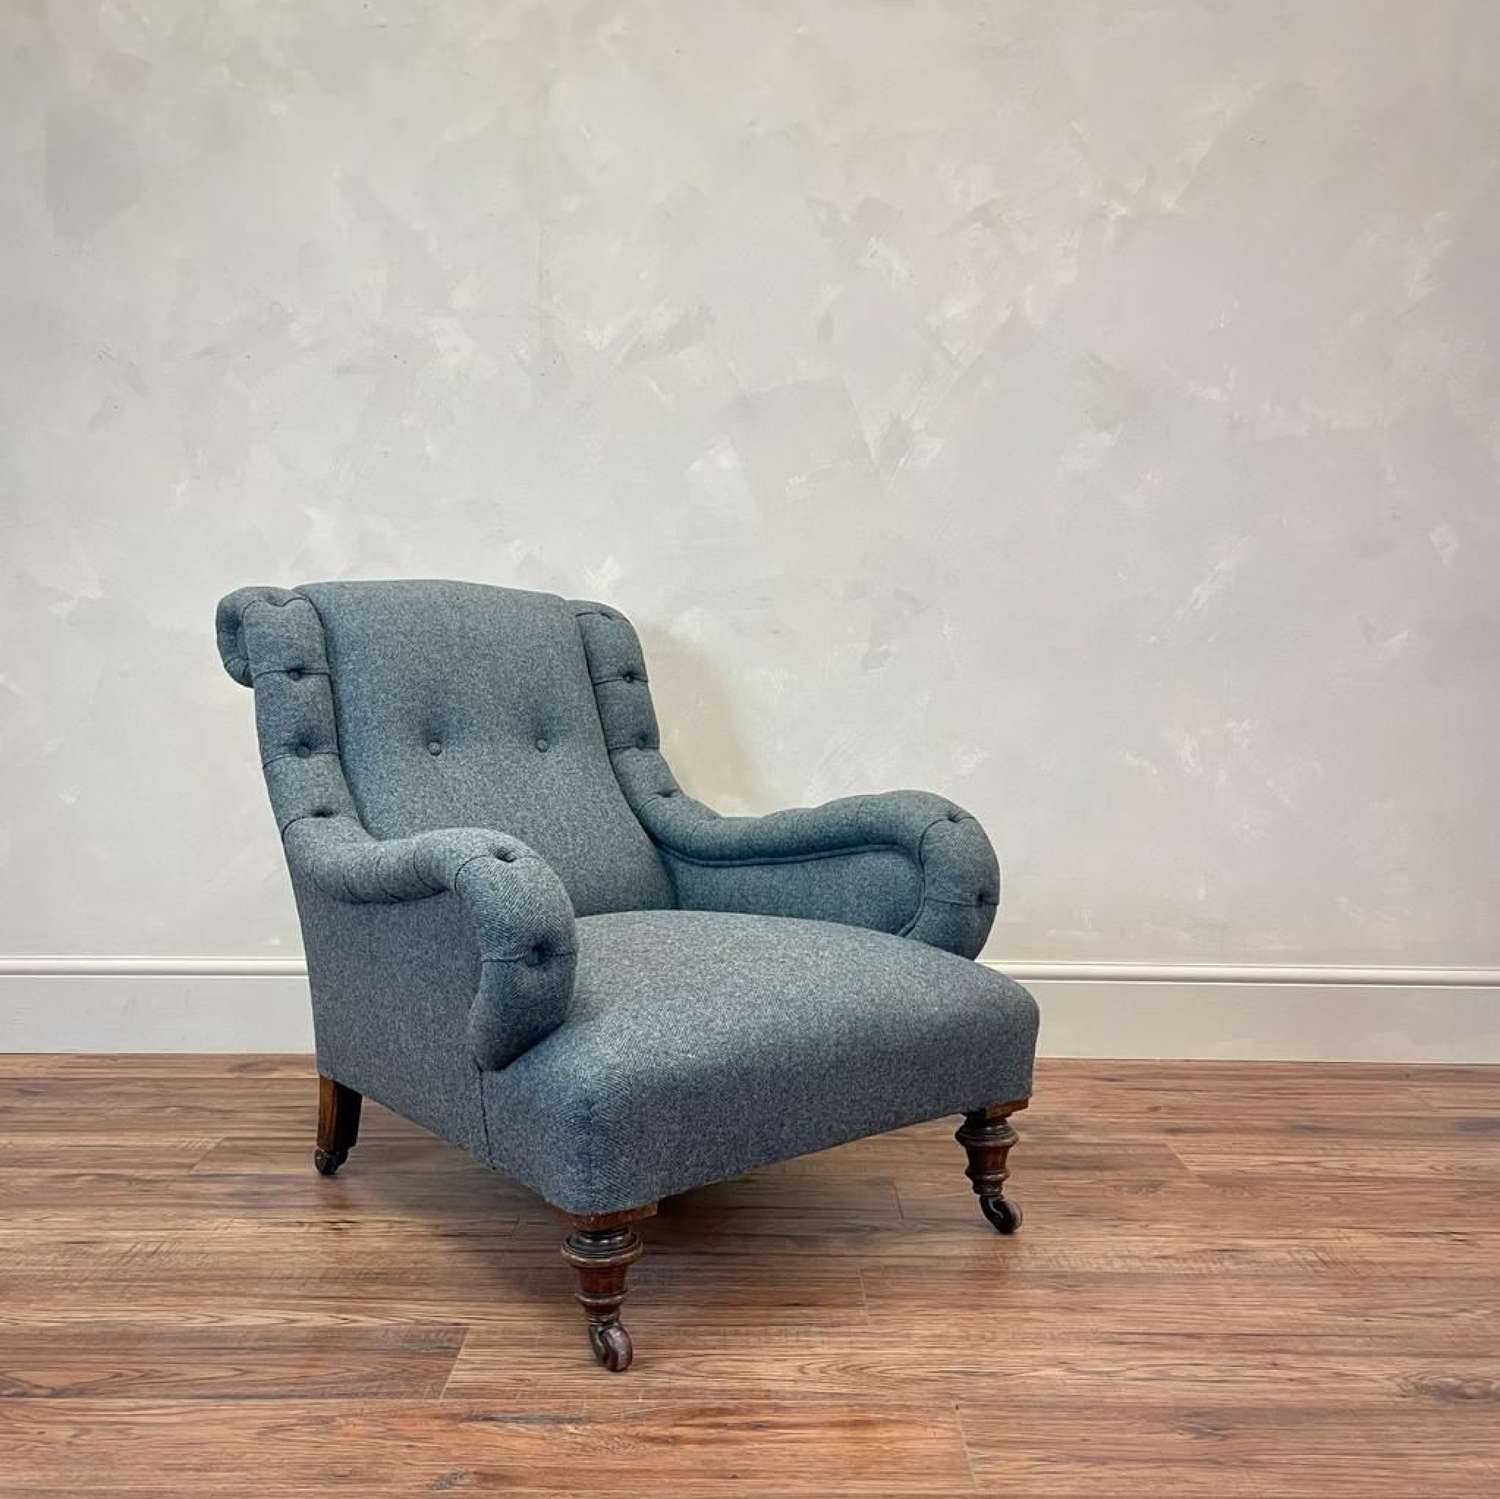 19th Century Upholstered Scrolled Arm Chair